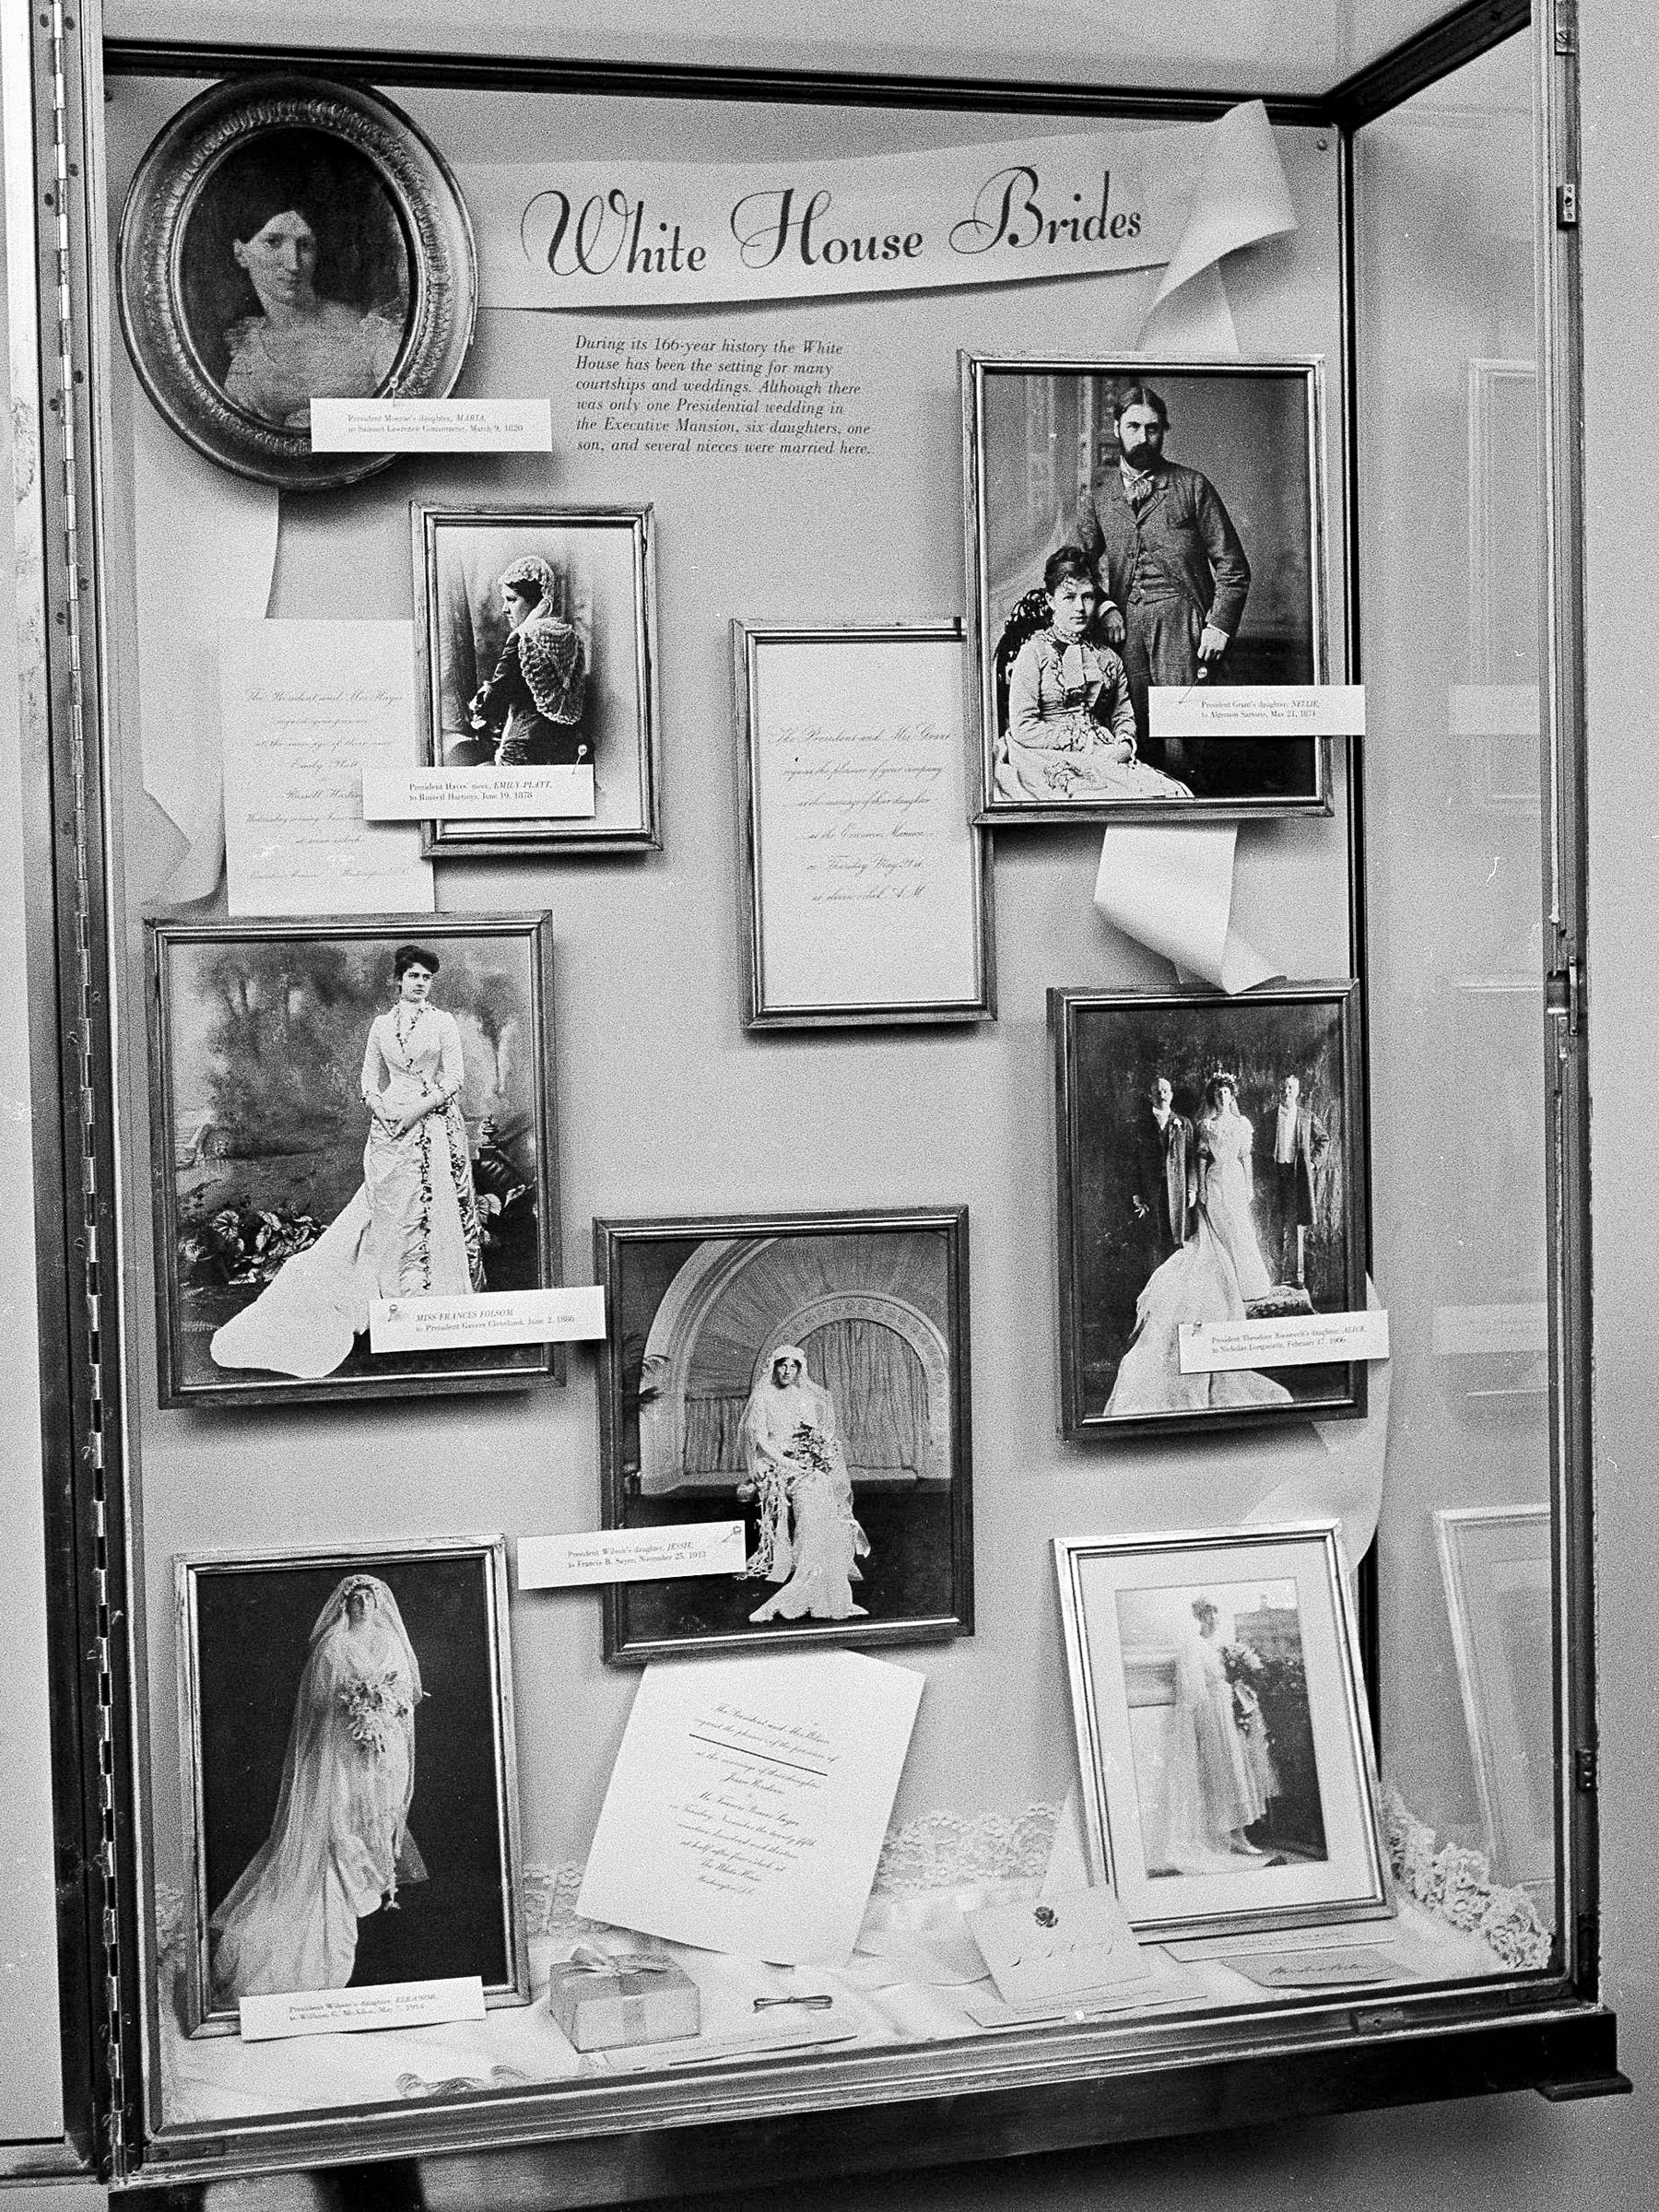 Photographs of brides married in the White House are displayed in the executive mansion in a glass-enclosed case in Washington, Aug. 1, 1966. Down the left side of the frame, top the bottom, are: President James Monroe's daughter, Maria; President Rutherford B. Haye's niece, Emily Platt, Miss Frances Folsom, married to President Grover Cleveland; and President Woodrow Wilson's daughter, Eleanor. At center, President Wilson's daughter, Jessie. At right, top to bottom: President U.S. grant's daughter, Nellie; President Theodore Roosevelt's daughter, Alice; and President Wilson's niece, Alice Wilson. (AP)